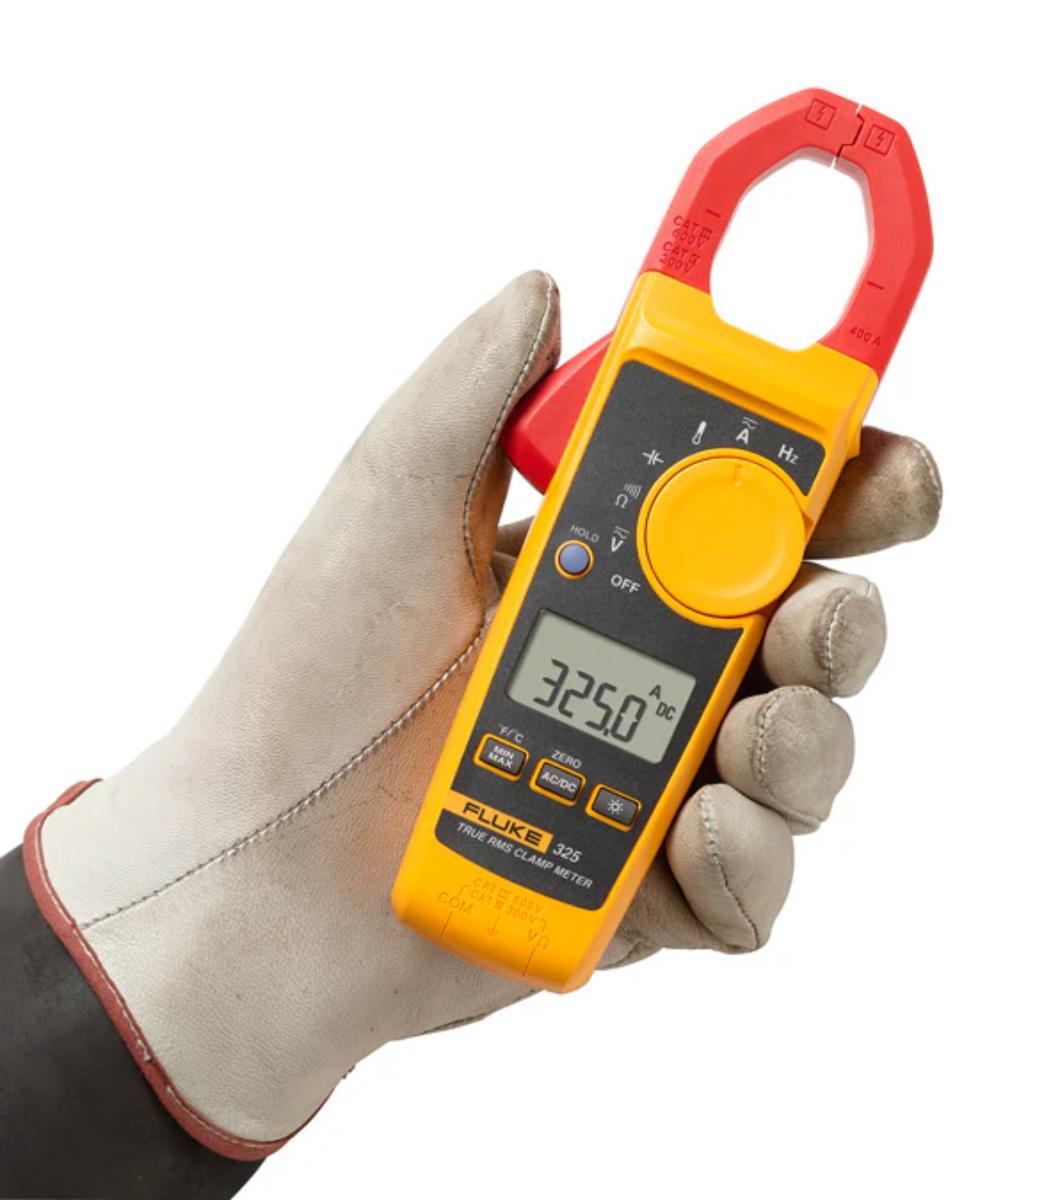 DIGITAL CLAMP METER 400A ACDC 600V TRMS